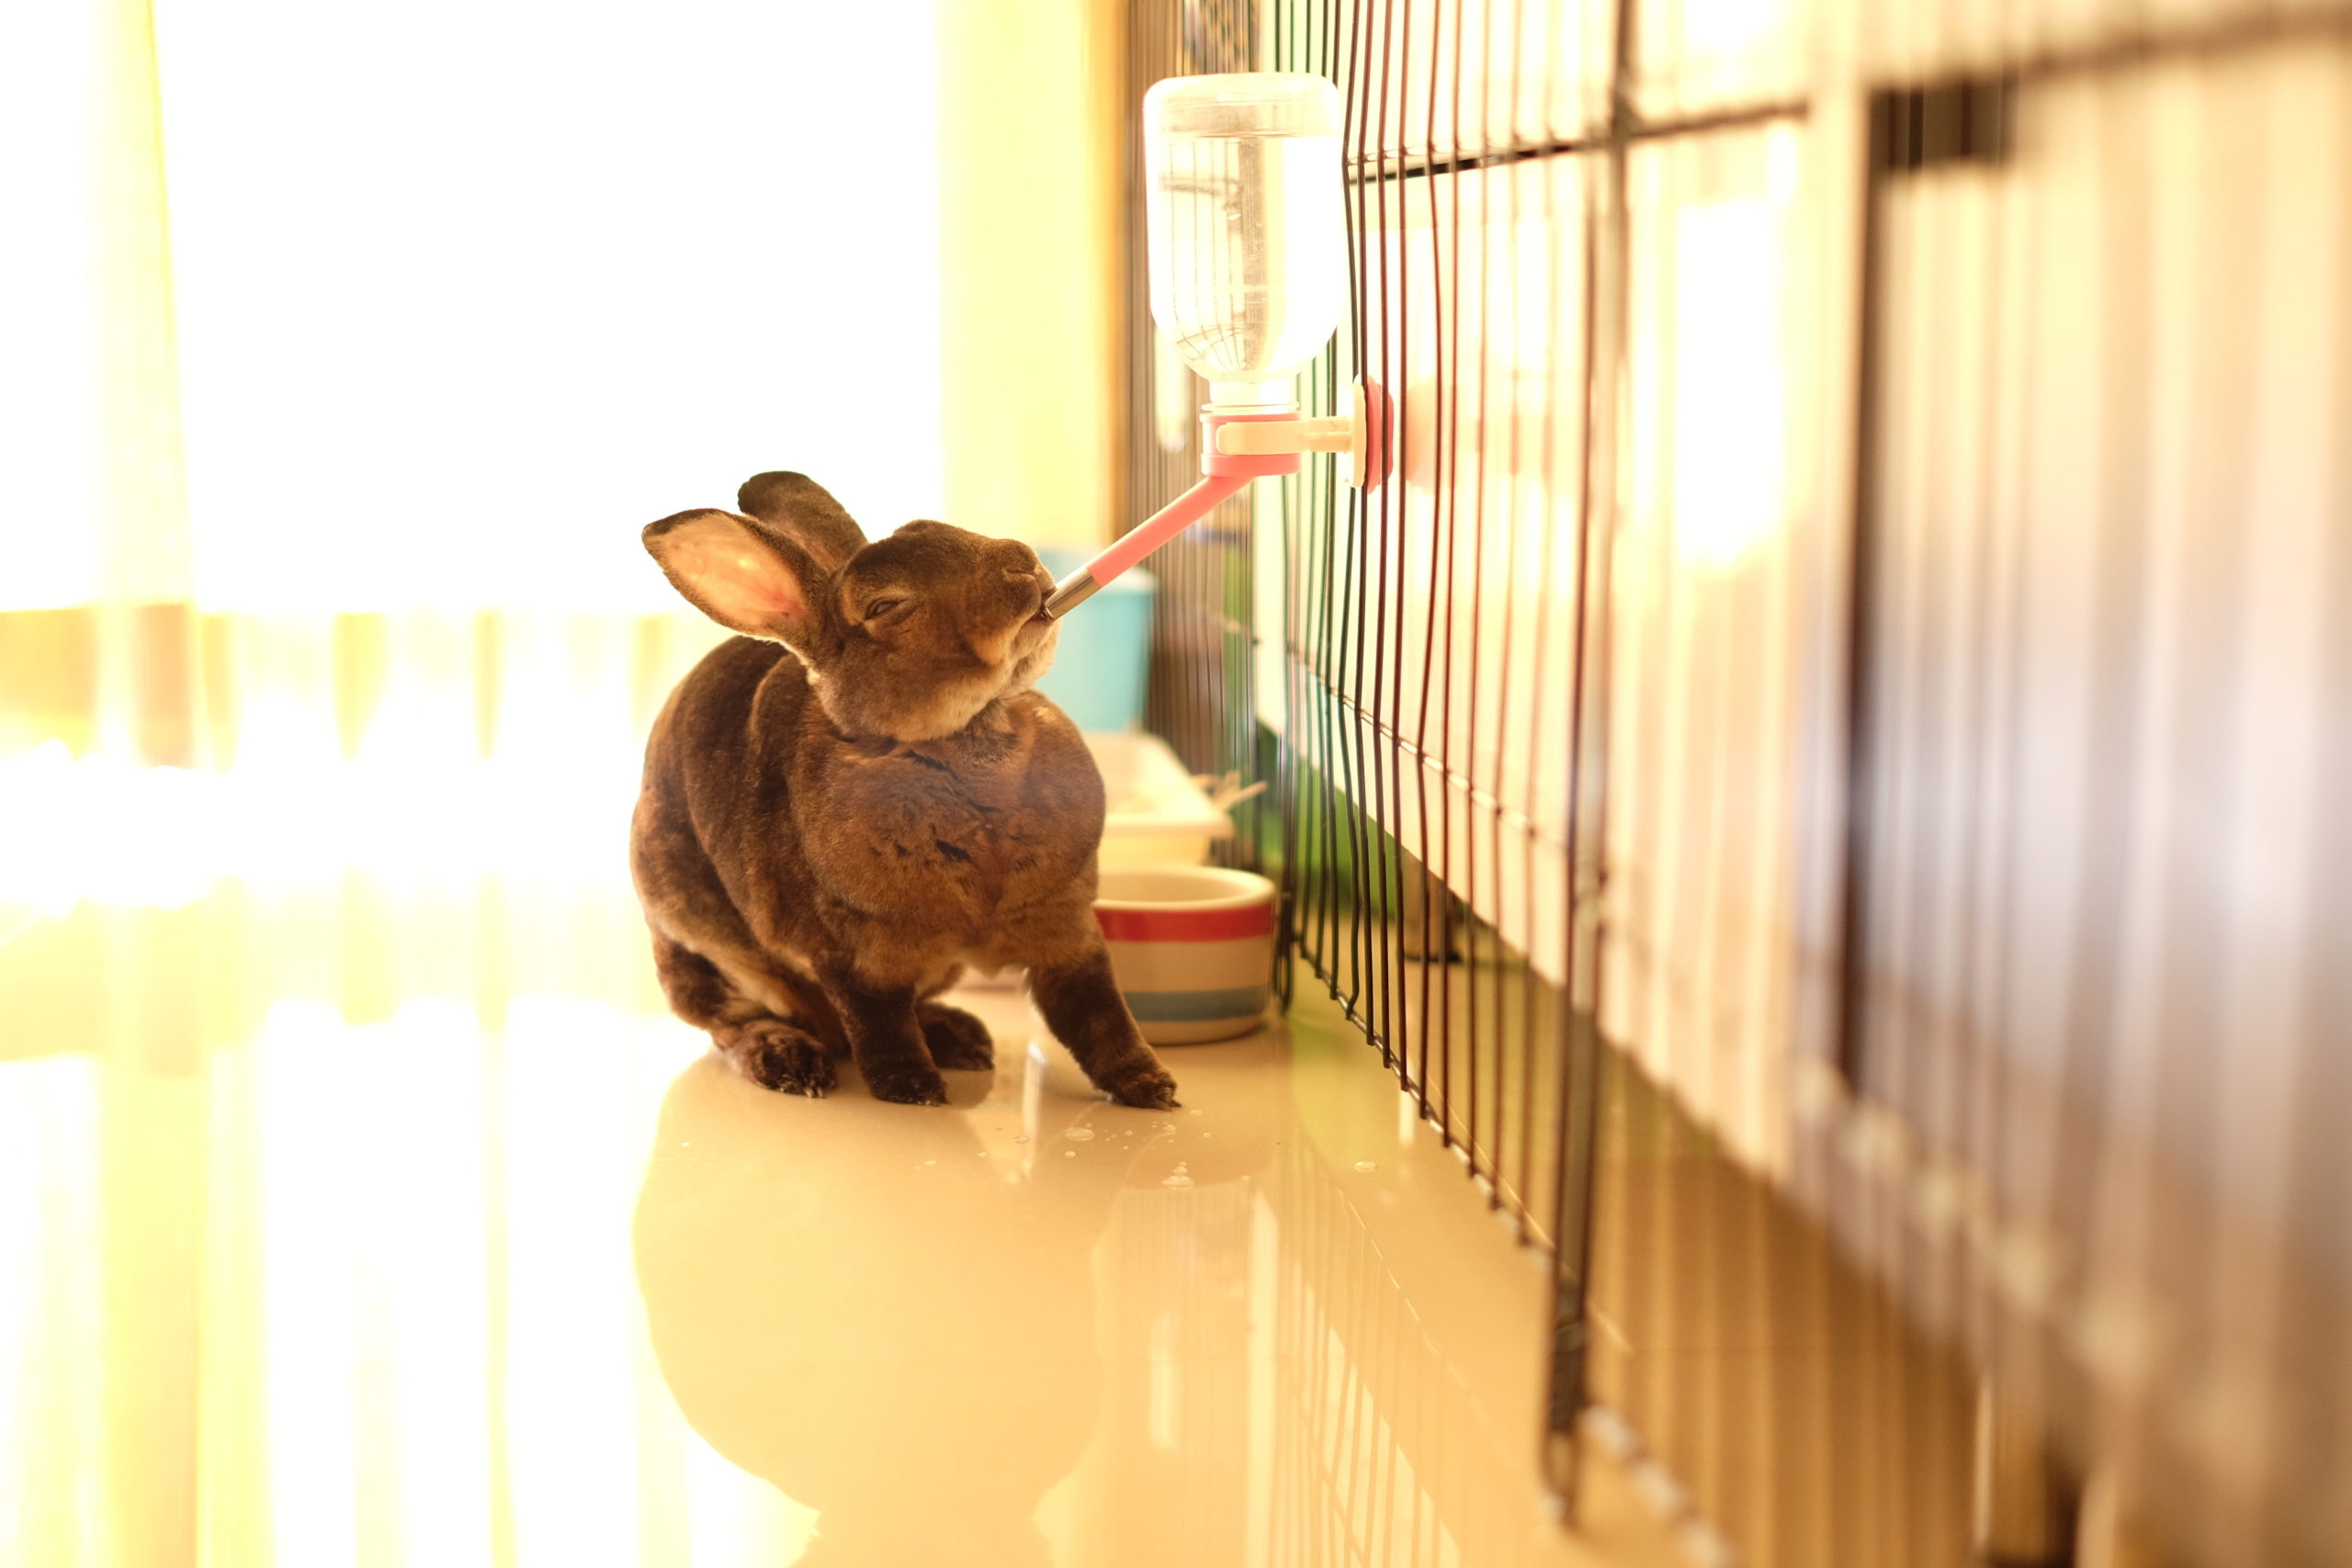 Rabbit drinking water out of a bottle